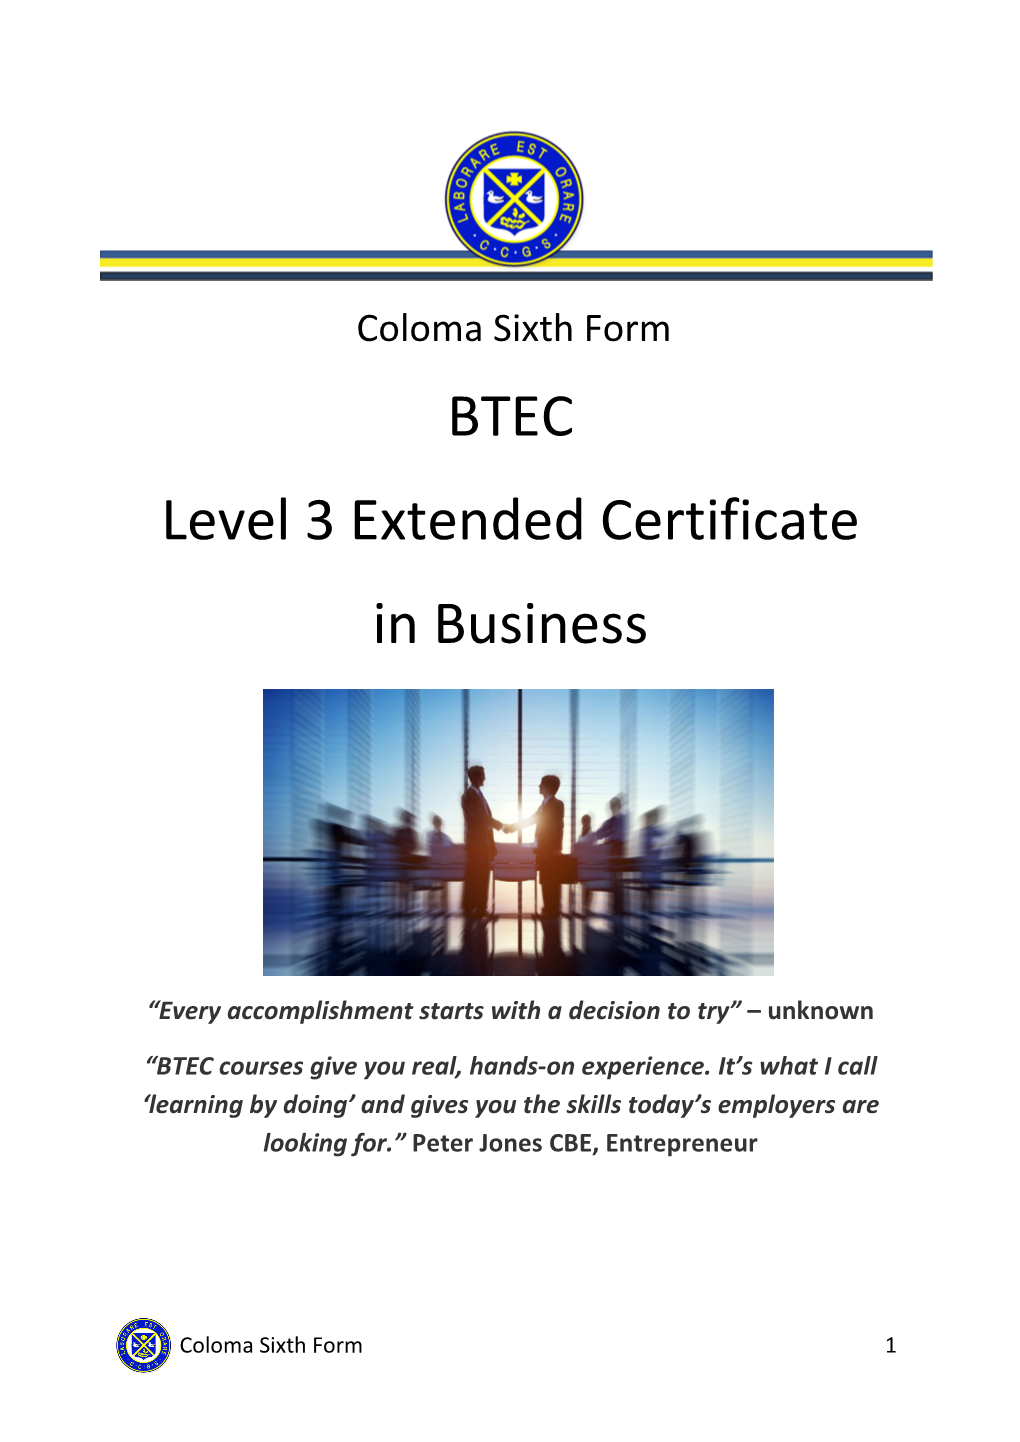 BTEC Level 3 Extended Certificate in Business